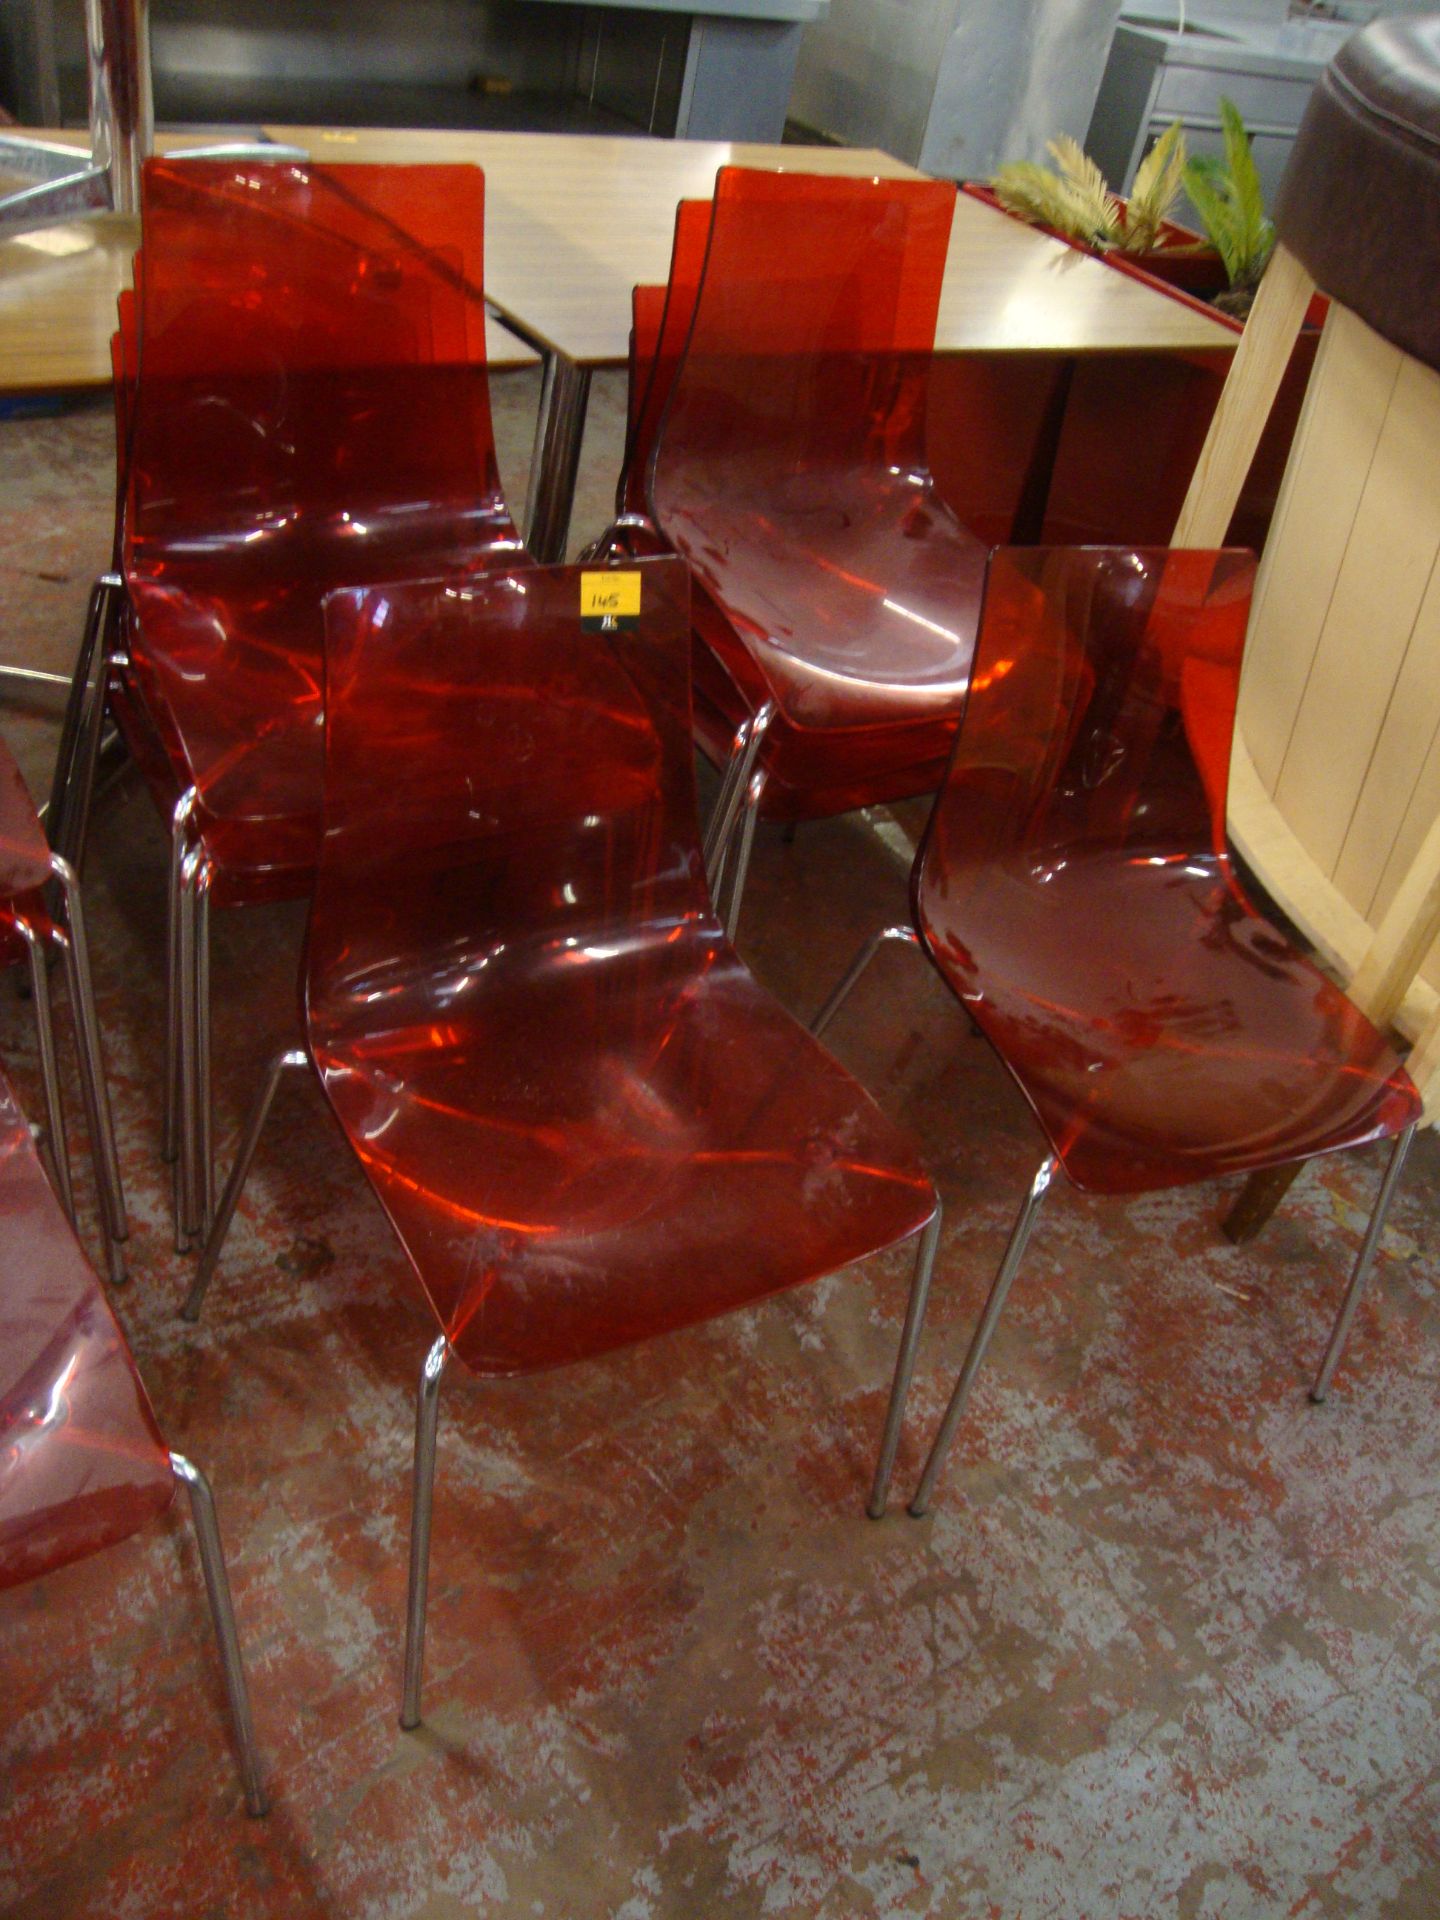 10 off matching red clear plastic chairs on metal legs. NB lots 138 - 145 consist of different